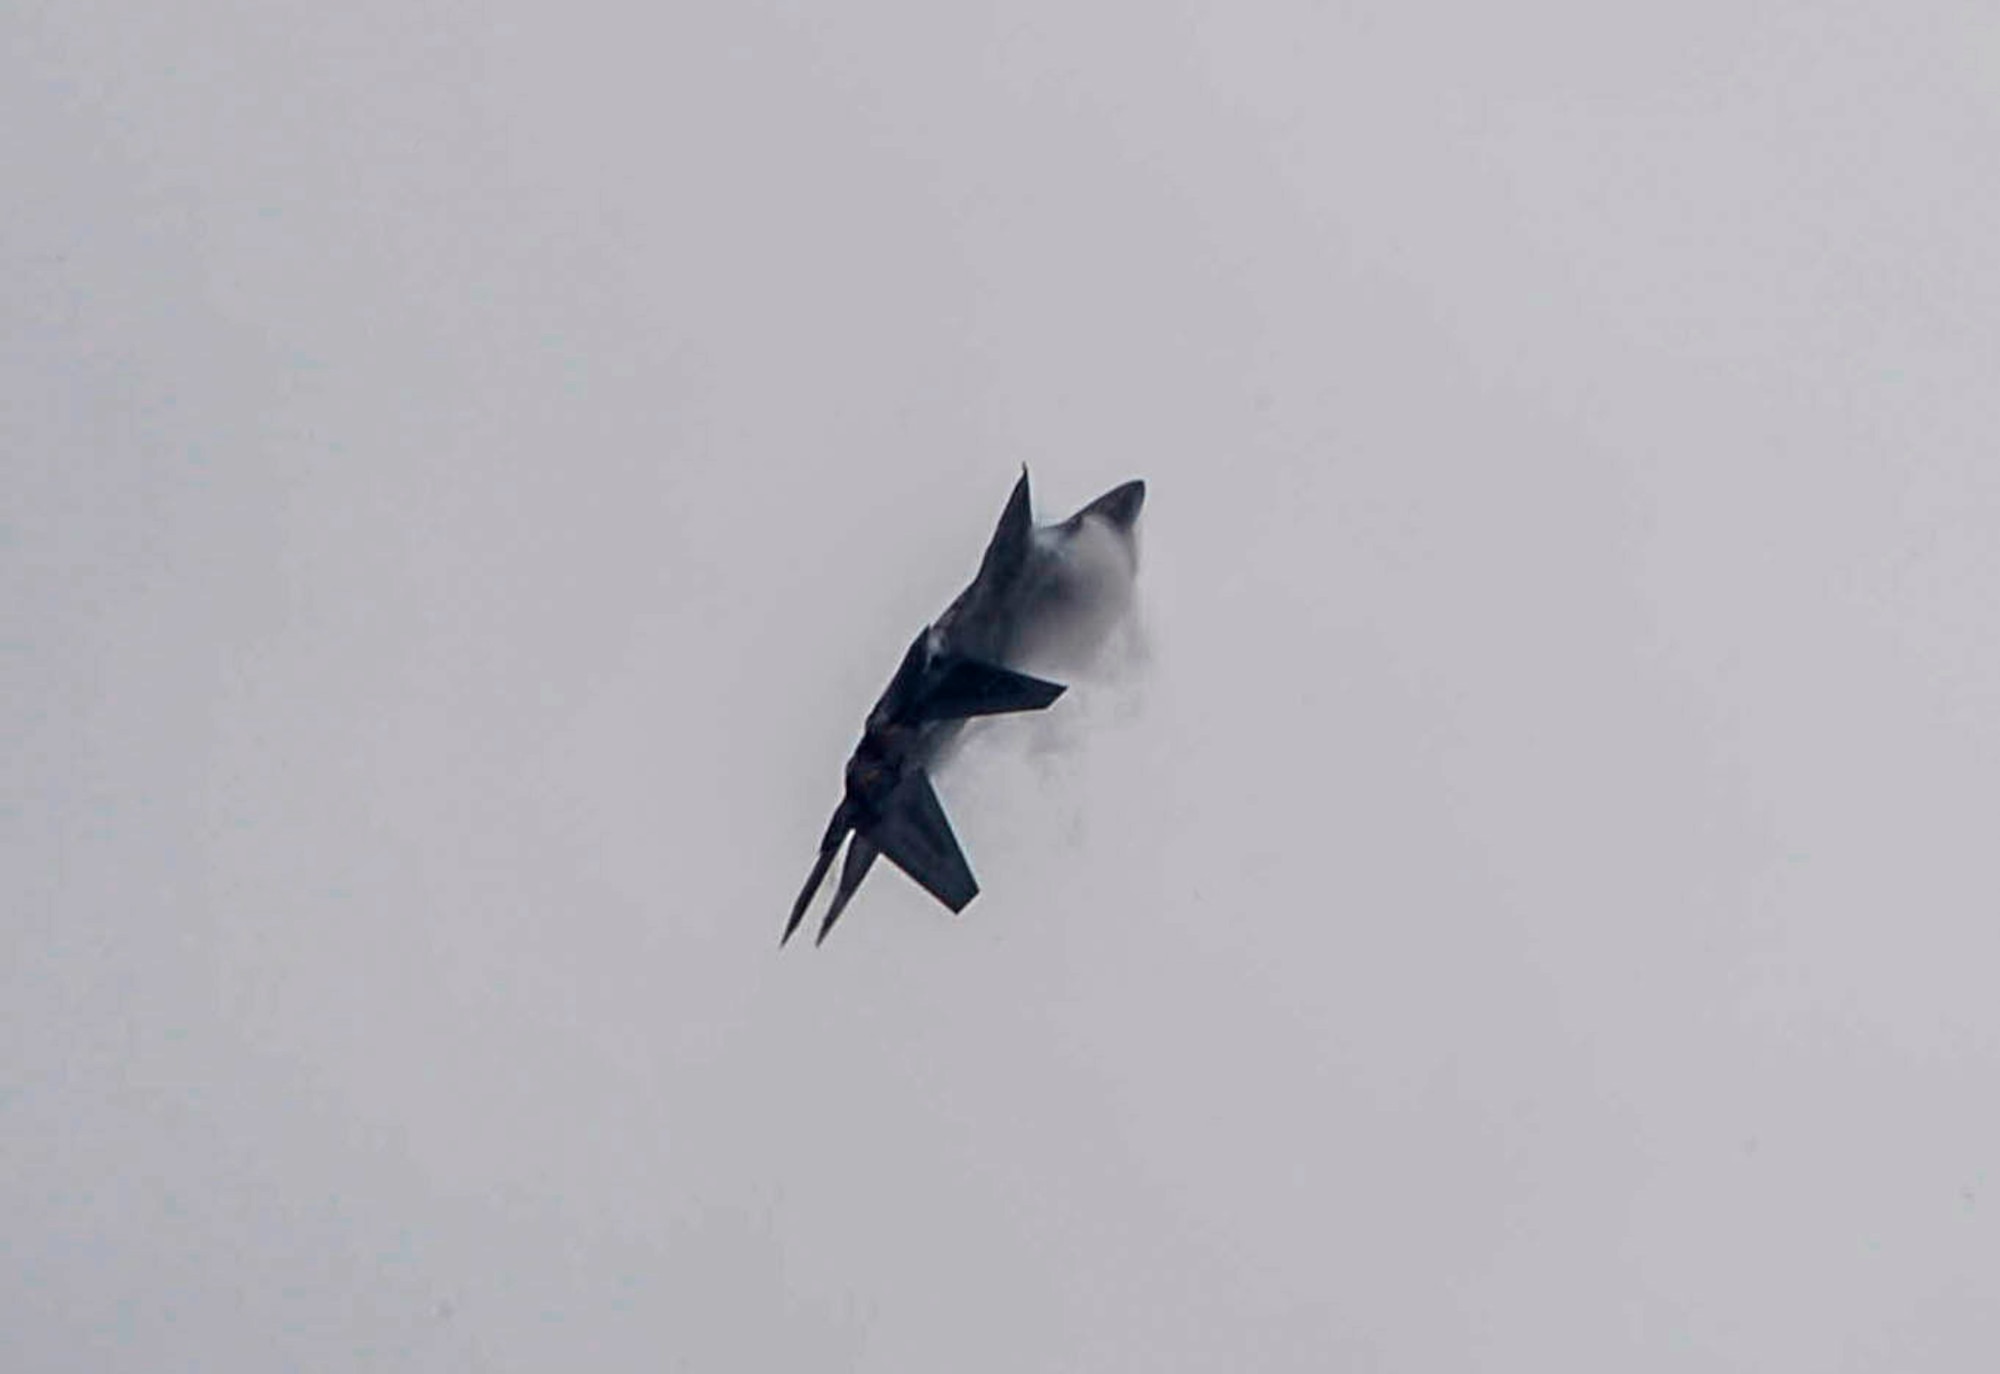 An F-22 Raptor, from the F-22 Raptor Demonstration Team at Langley AFB, Va., performs its aerial acrobatics routine at the 2016 International Air and Space Fair (FIDAE) in Santiago, Chile, April 1, 2016. During FIDAE, U.S. Airmen participated in in several subject matter expert exchanges with their Chilean counterparts and also hosted static displays and aerial demonstrations to support the air show.  (U.S. Air Force photo by Tech. Sgt. Heather Redman/Released)